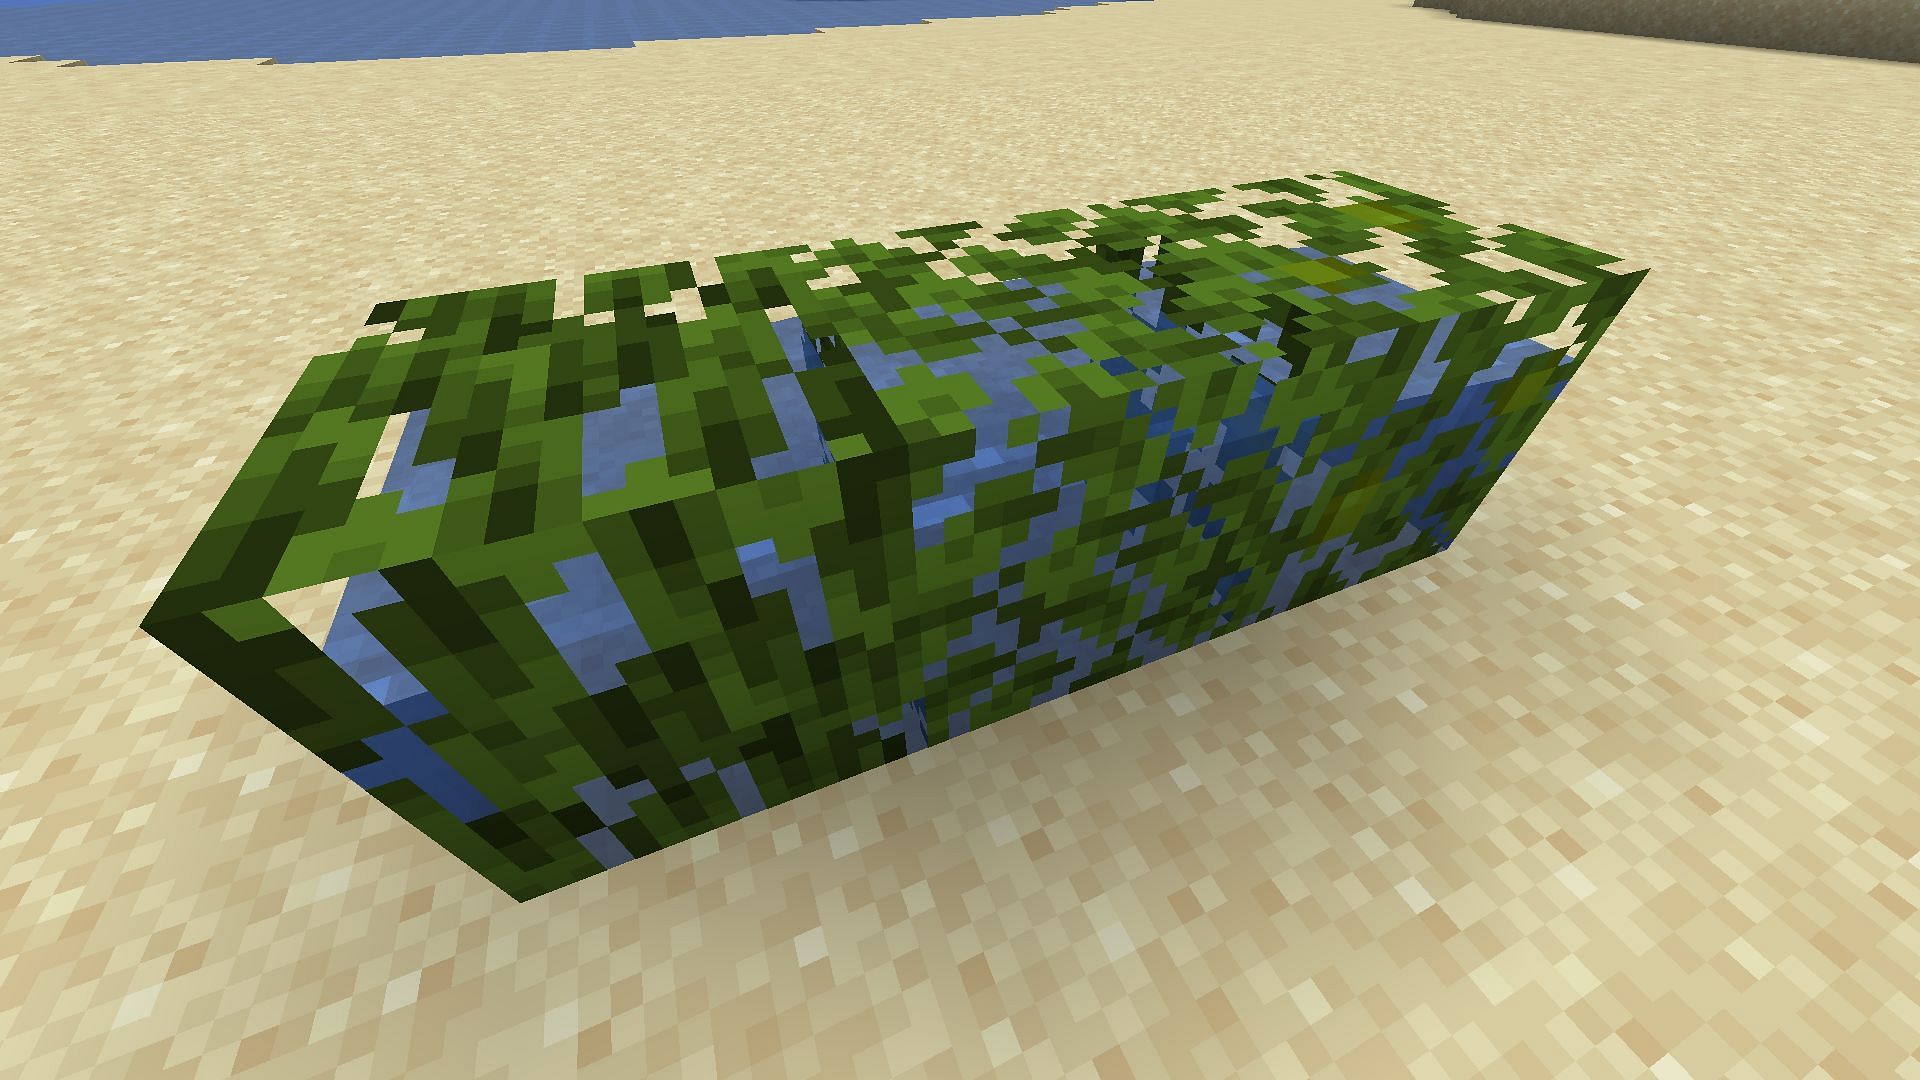 All types of leaf blocks can be waterlogged (Image via Minecraft)